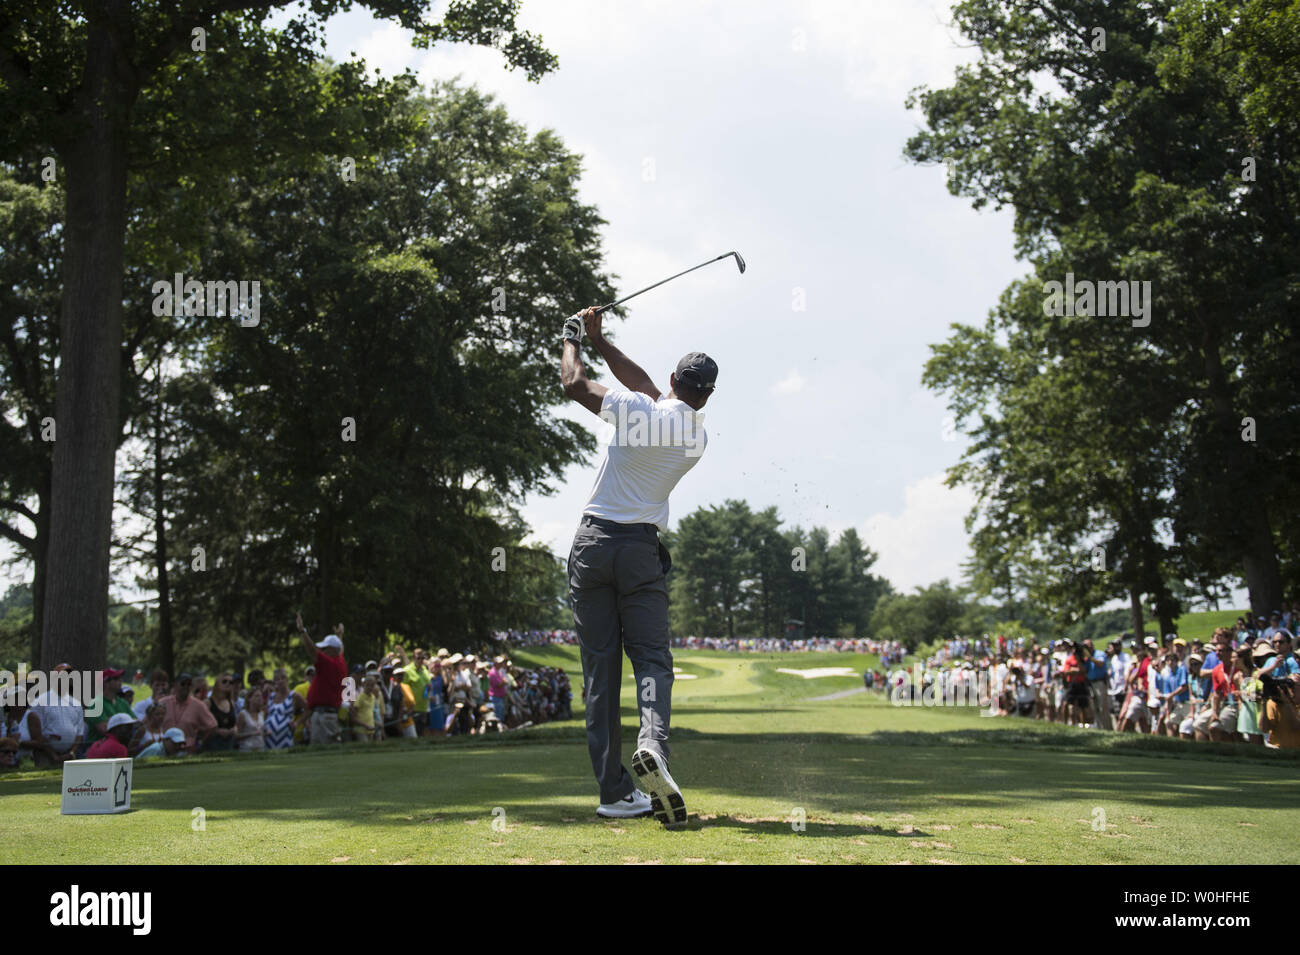 Tiger Woods hits off of the 7th tee during the second round of the Quicken Loans Nationals at Congressional Country Club, in Potomac, Maryland on June 27, 2014.  UPI/Kevin Dietsch Stock Photo